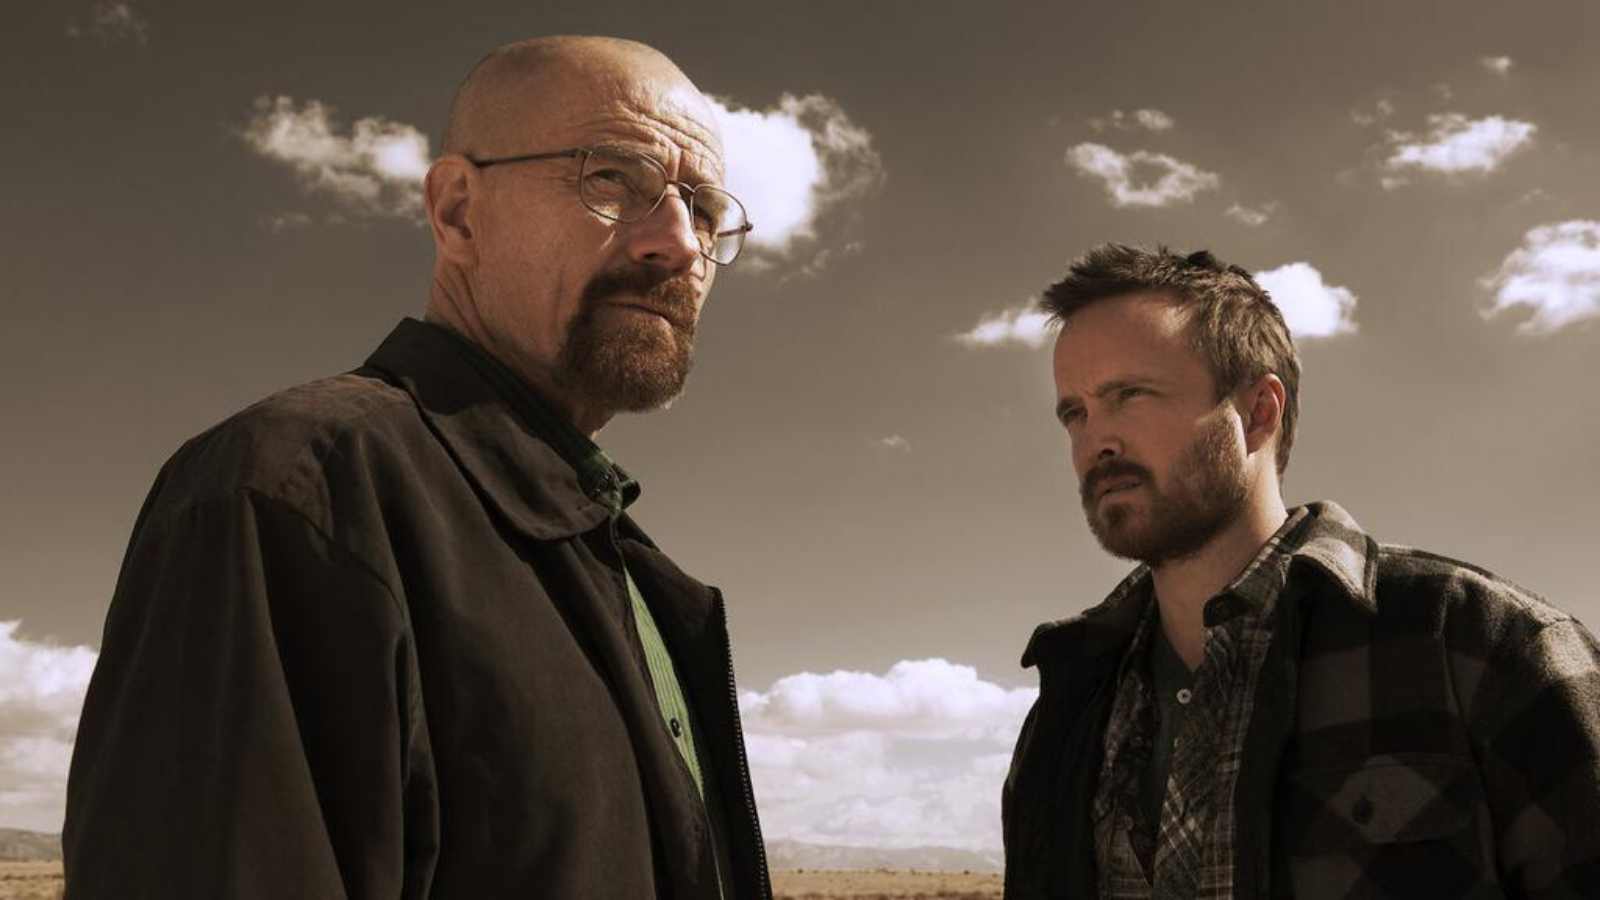 Breaking Bad got a statue in New Mexico City